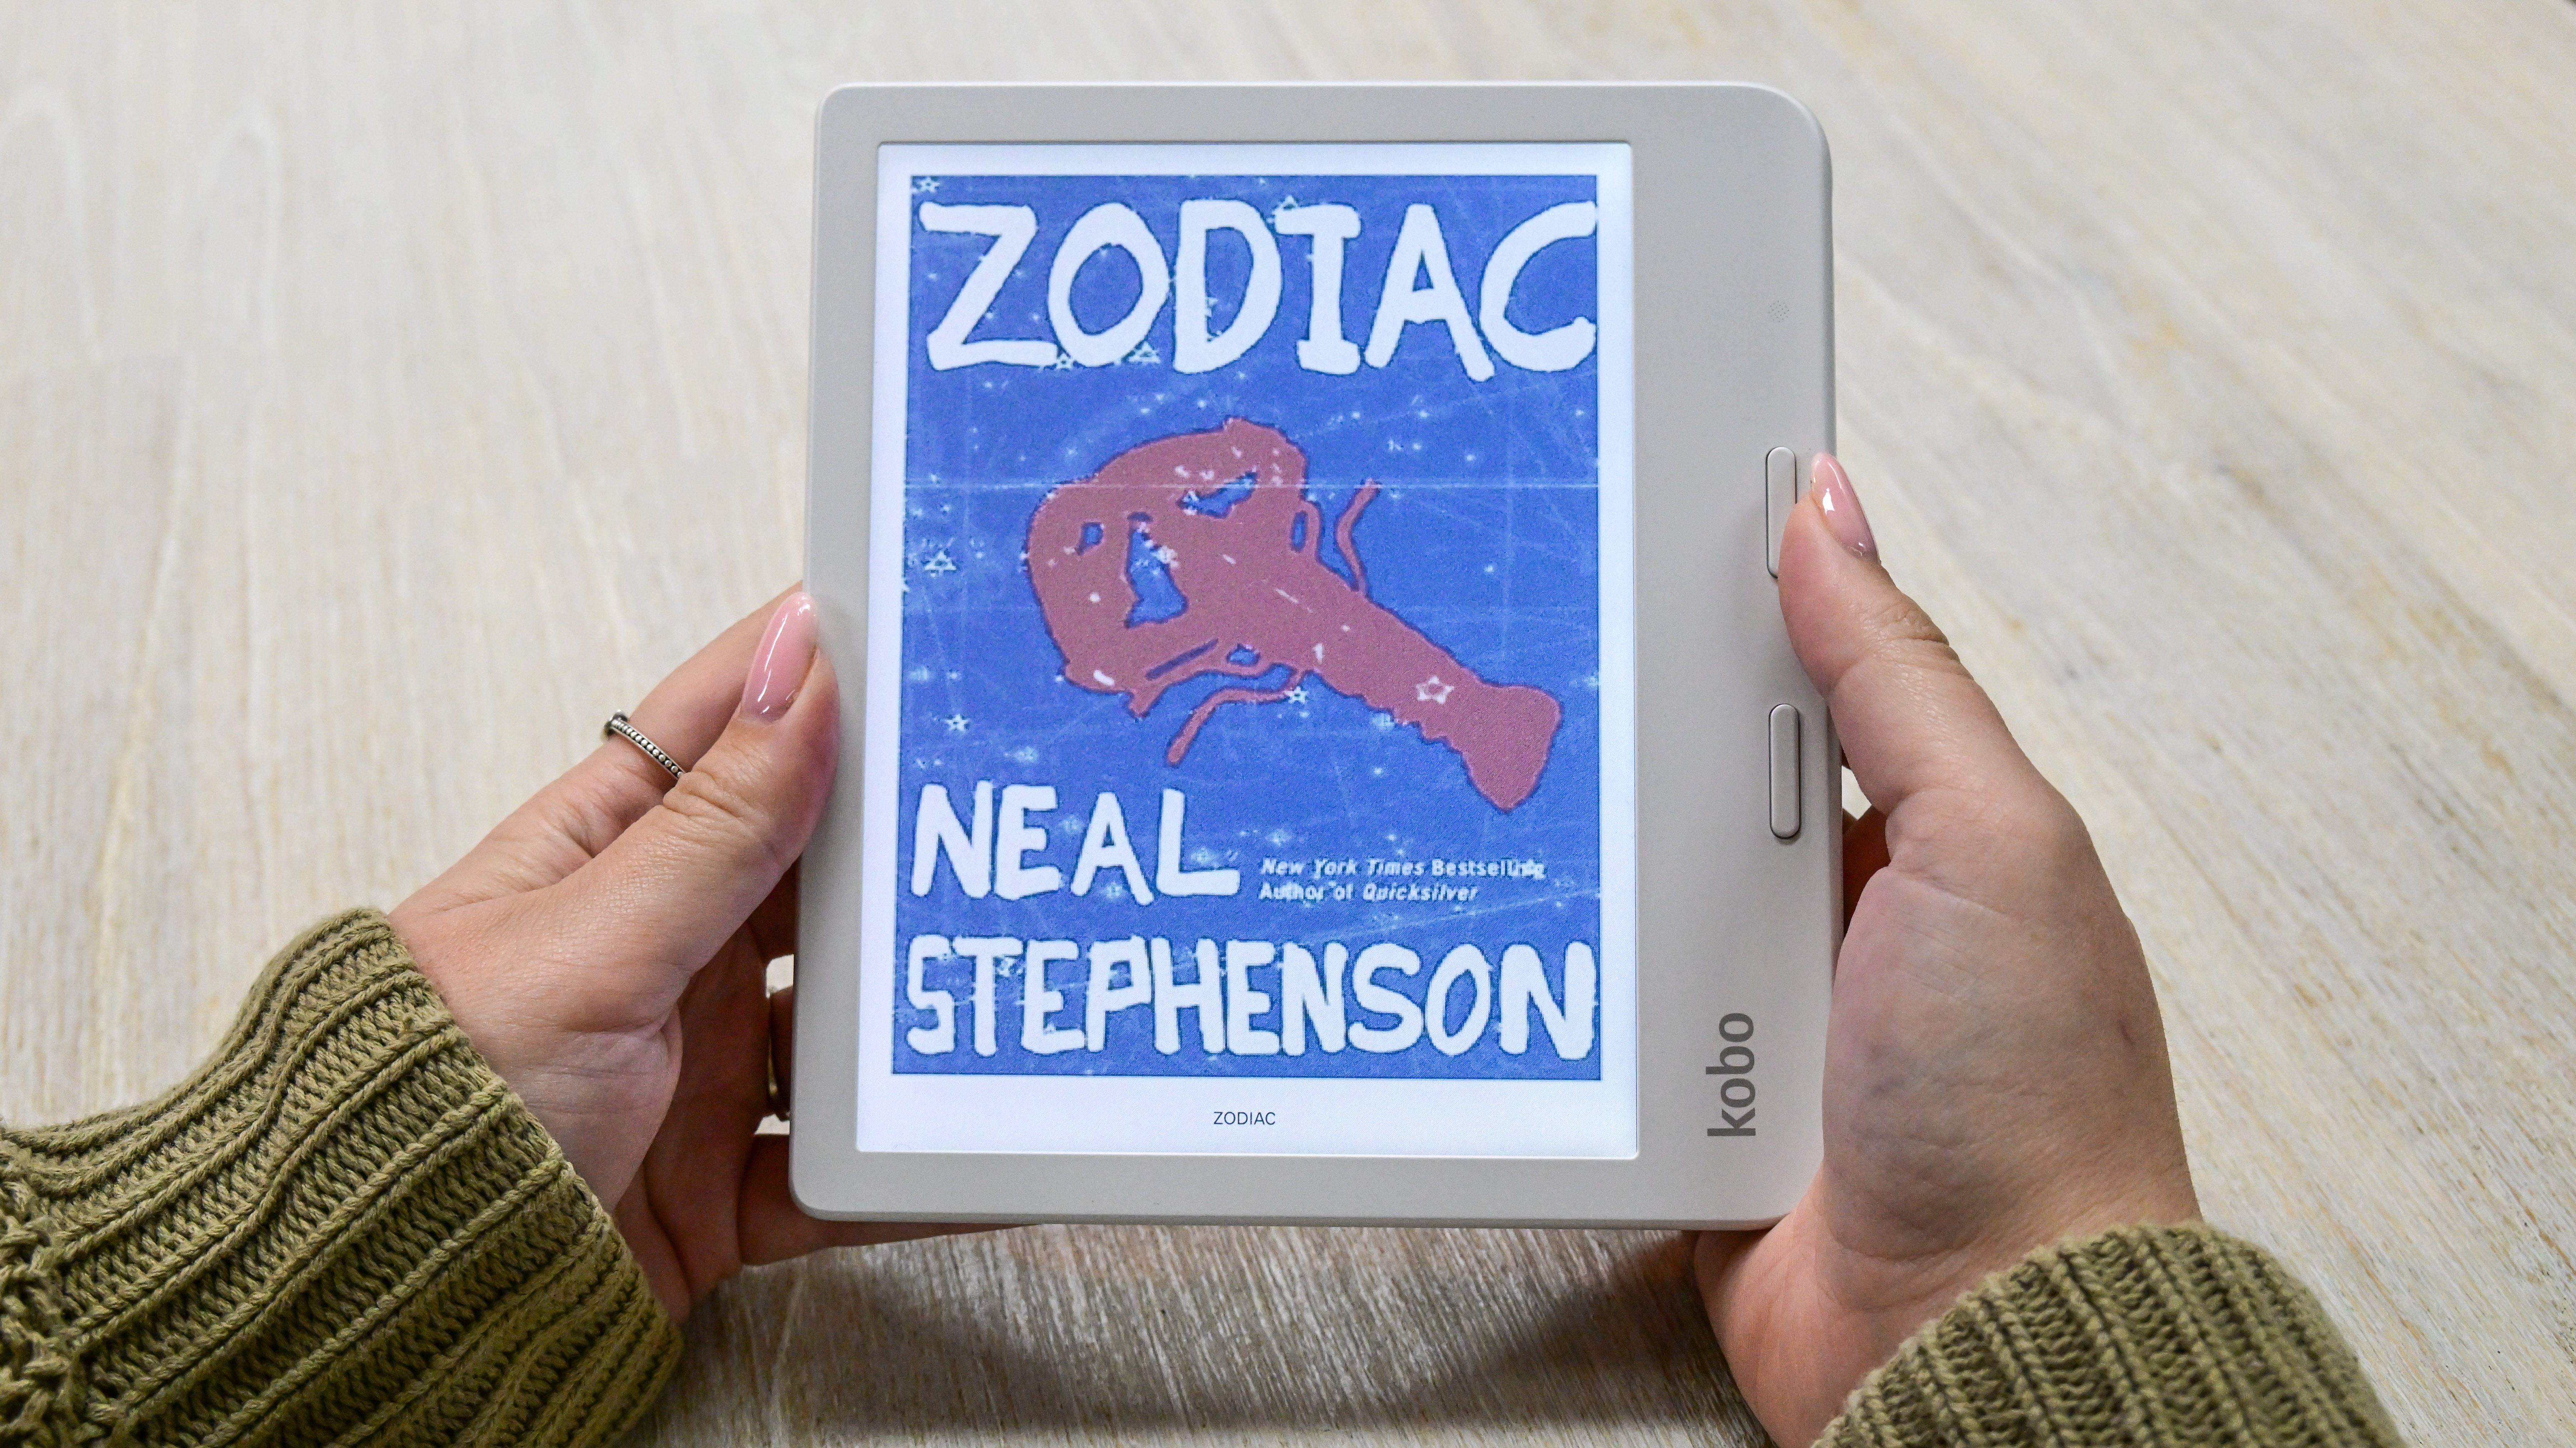 Neal Sephenson's Zodiac book cover displayed in color on the Kobo Libra Colour ereader